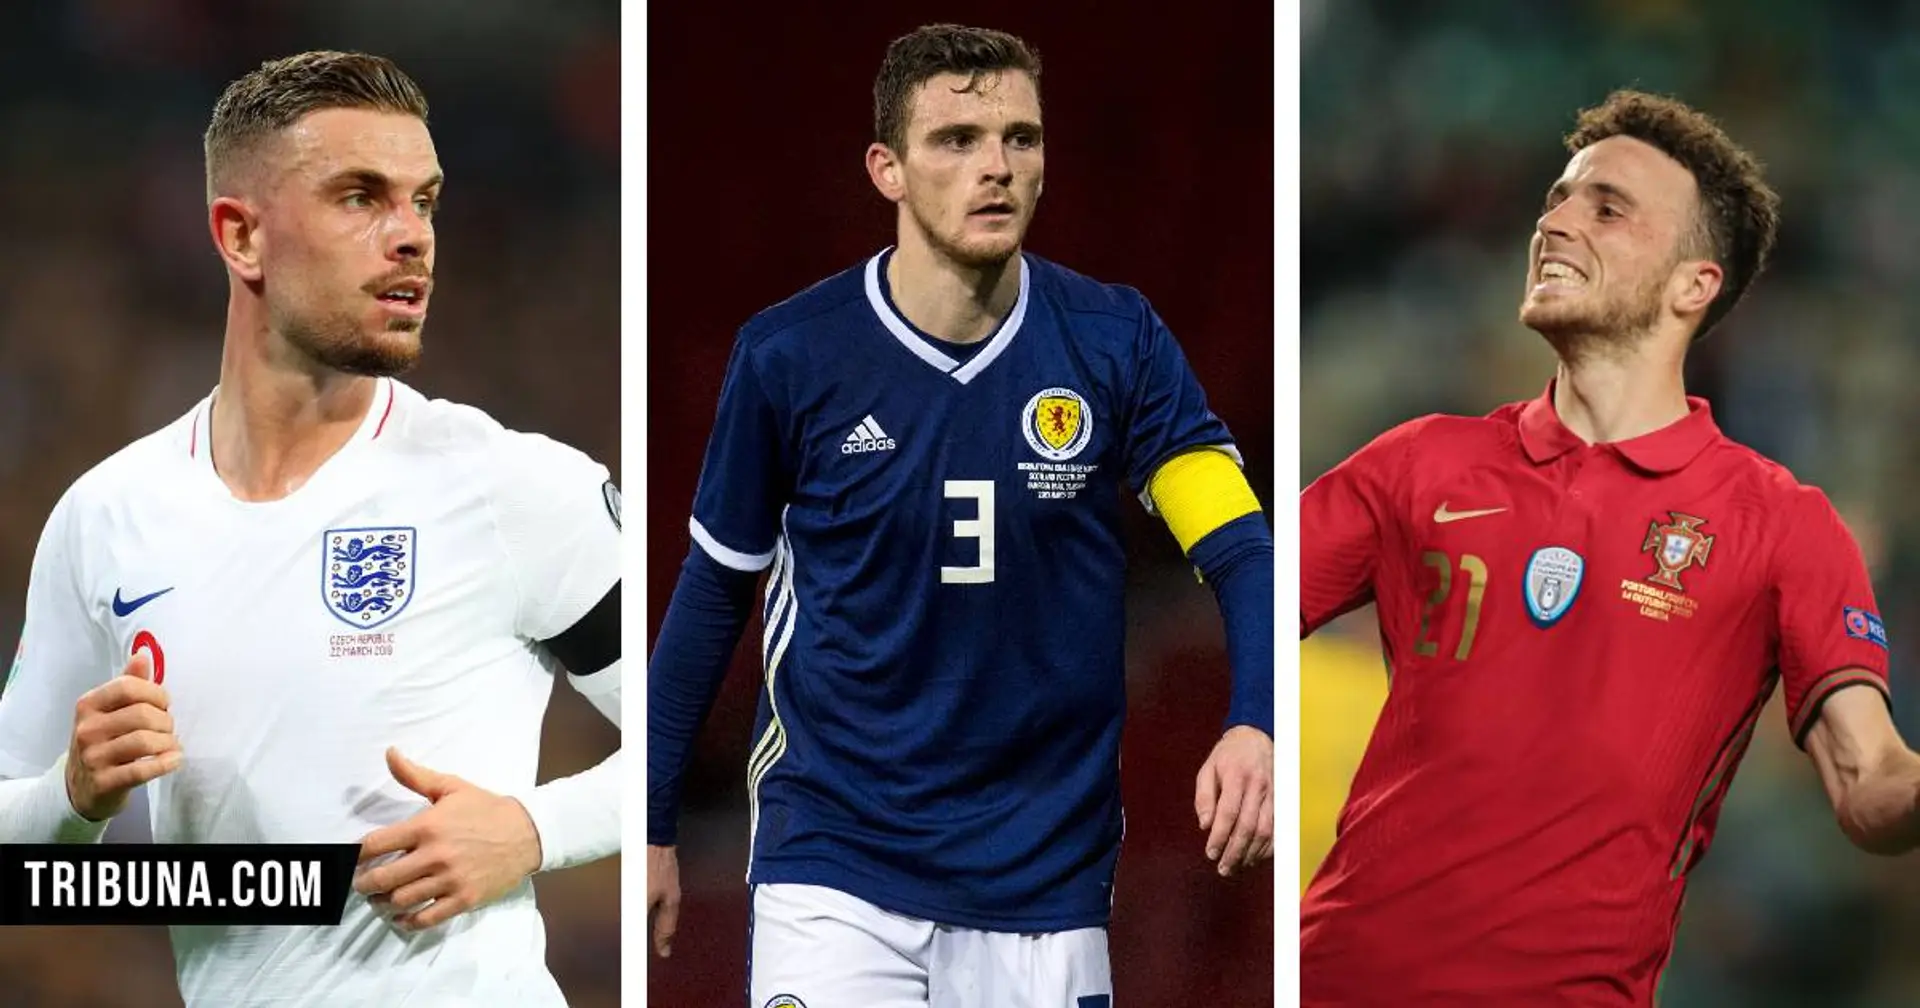 Euro 2020 set to start tomorrow - which team are you supporting? 